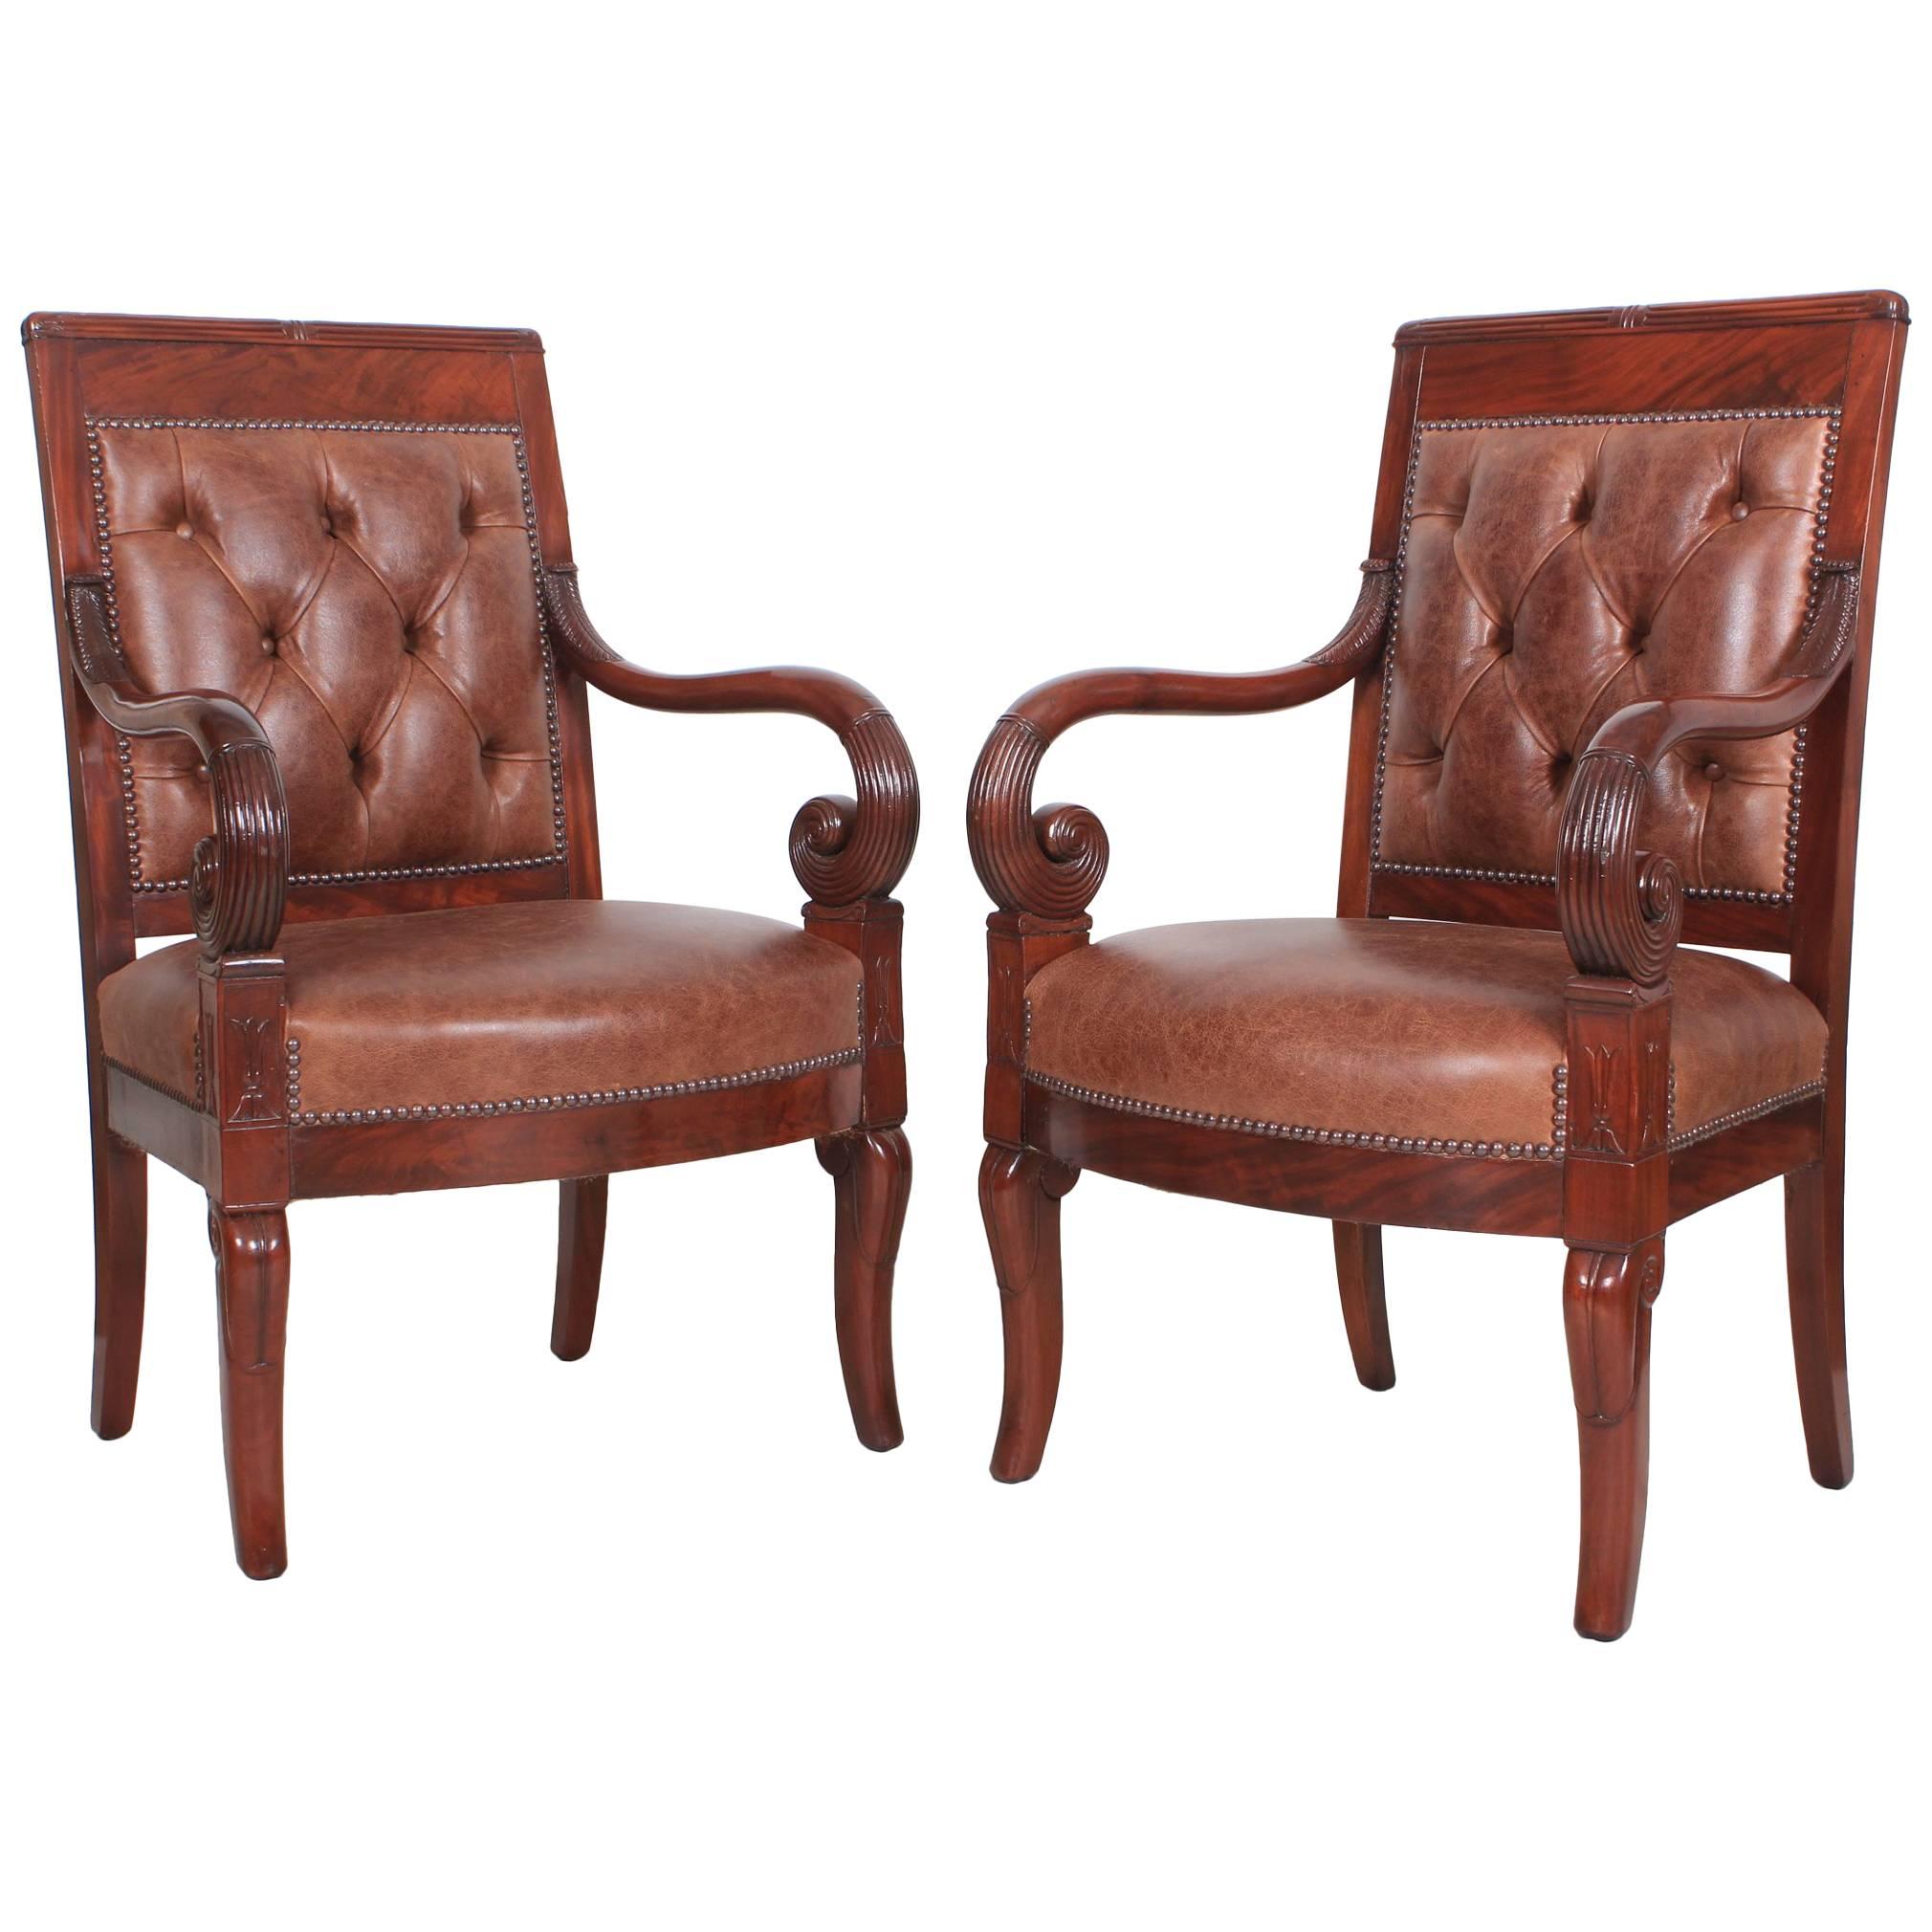 Pair of French Empire Style Mahogany and Leather Library Chairs For Sale